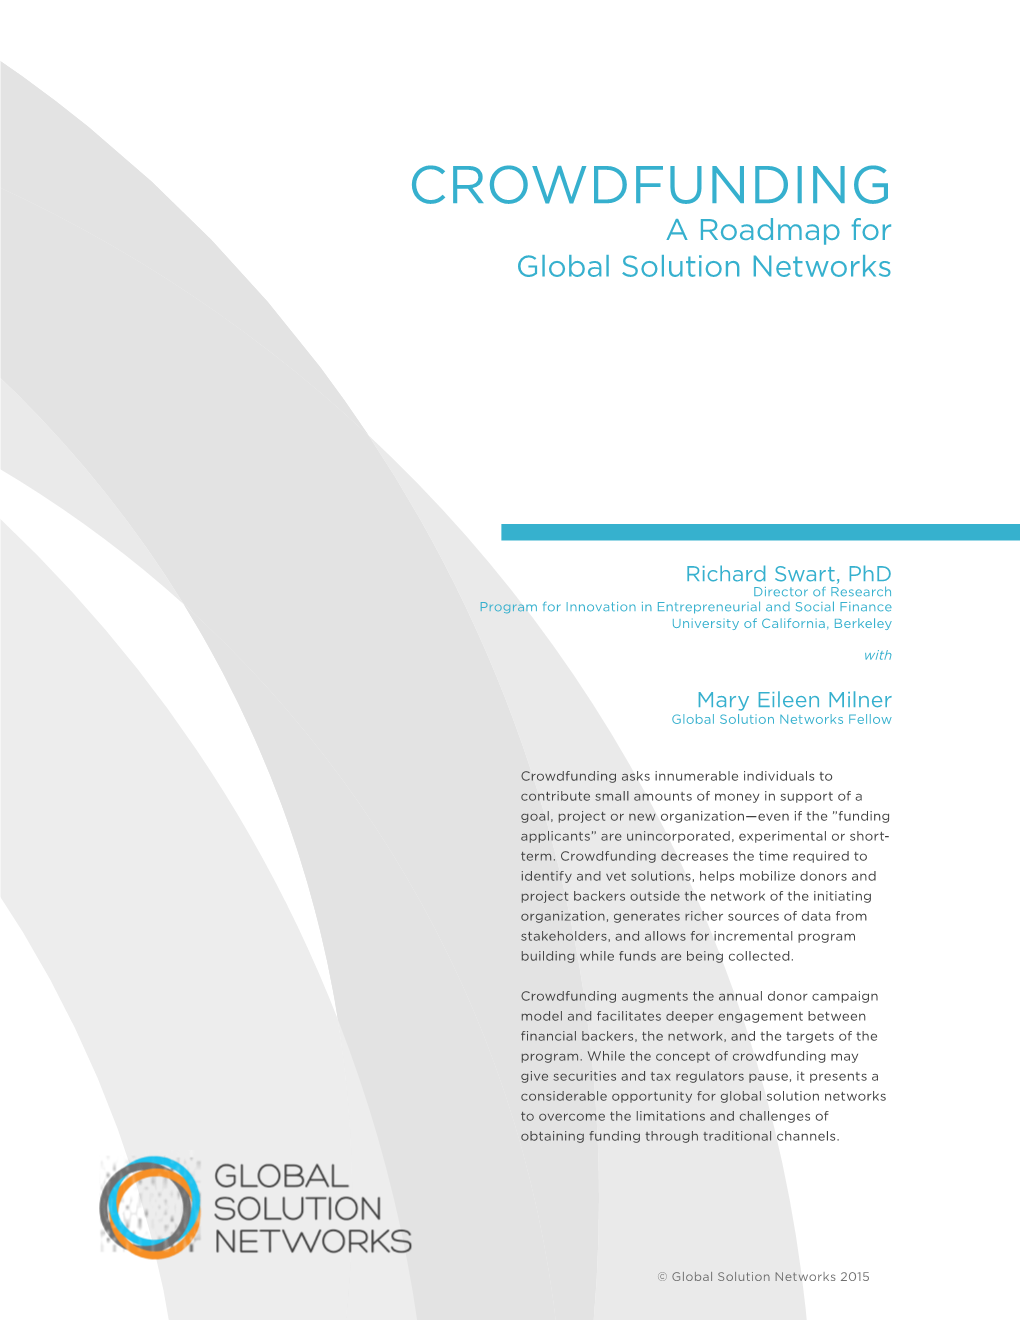 Crowdfunding a Roadmap for Global Solution Networks